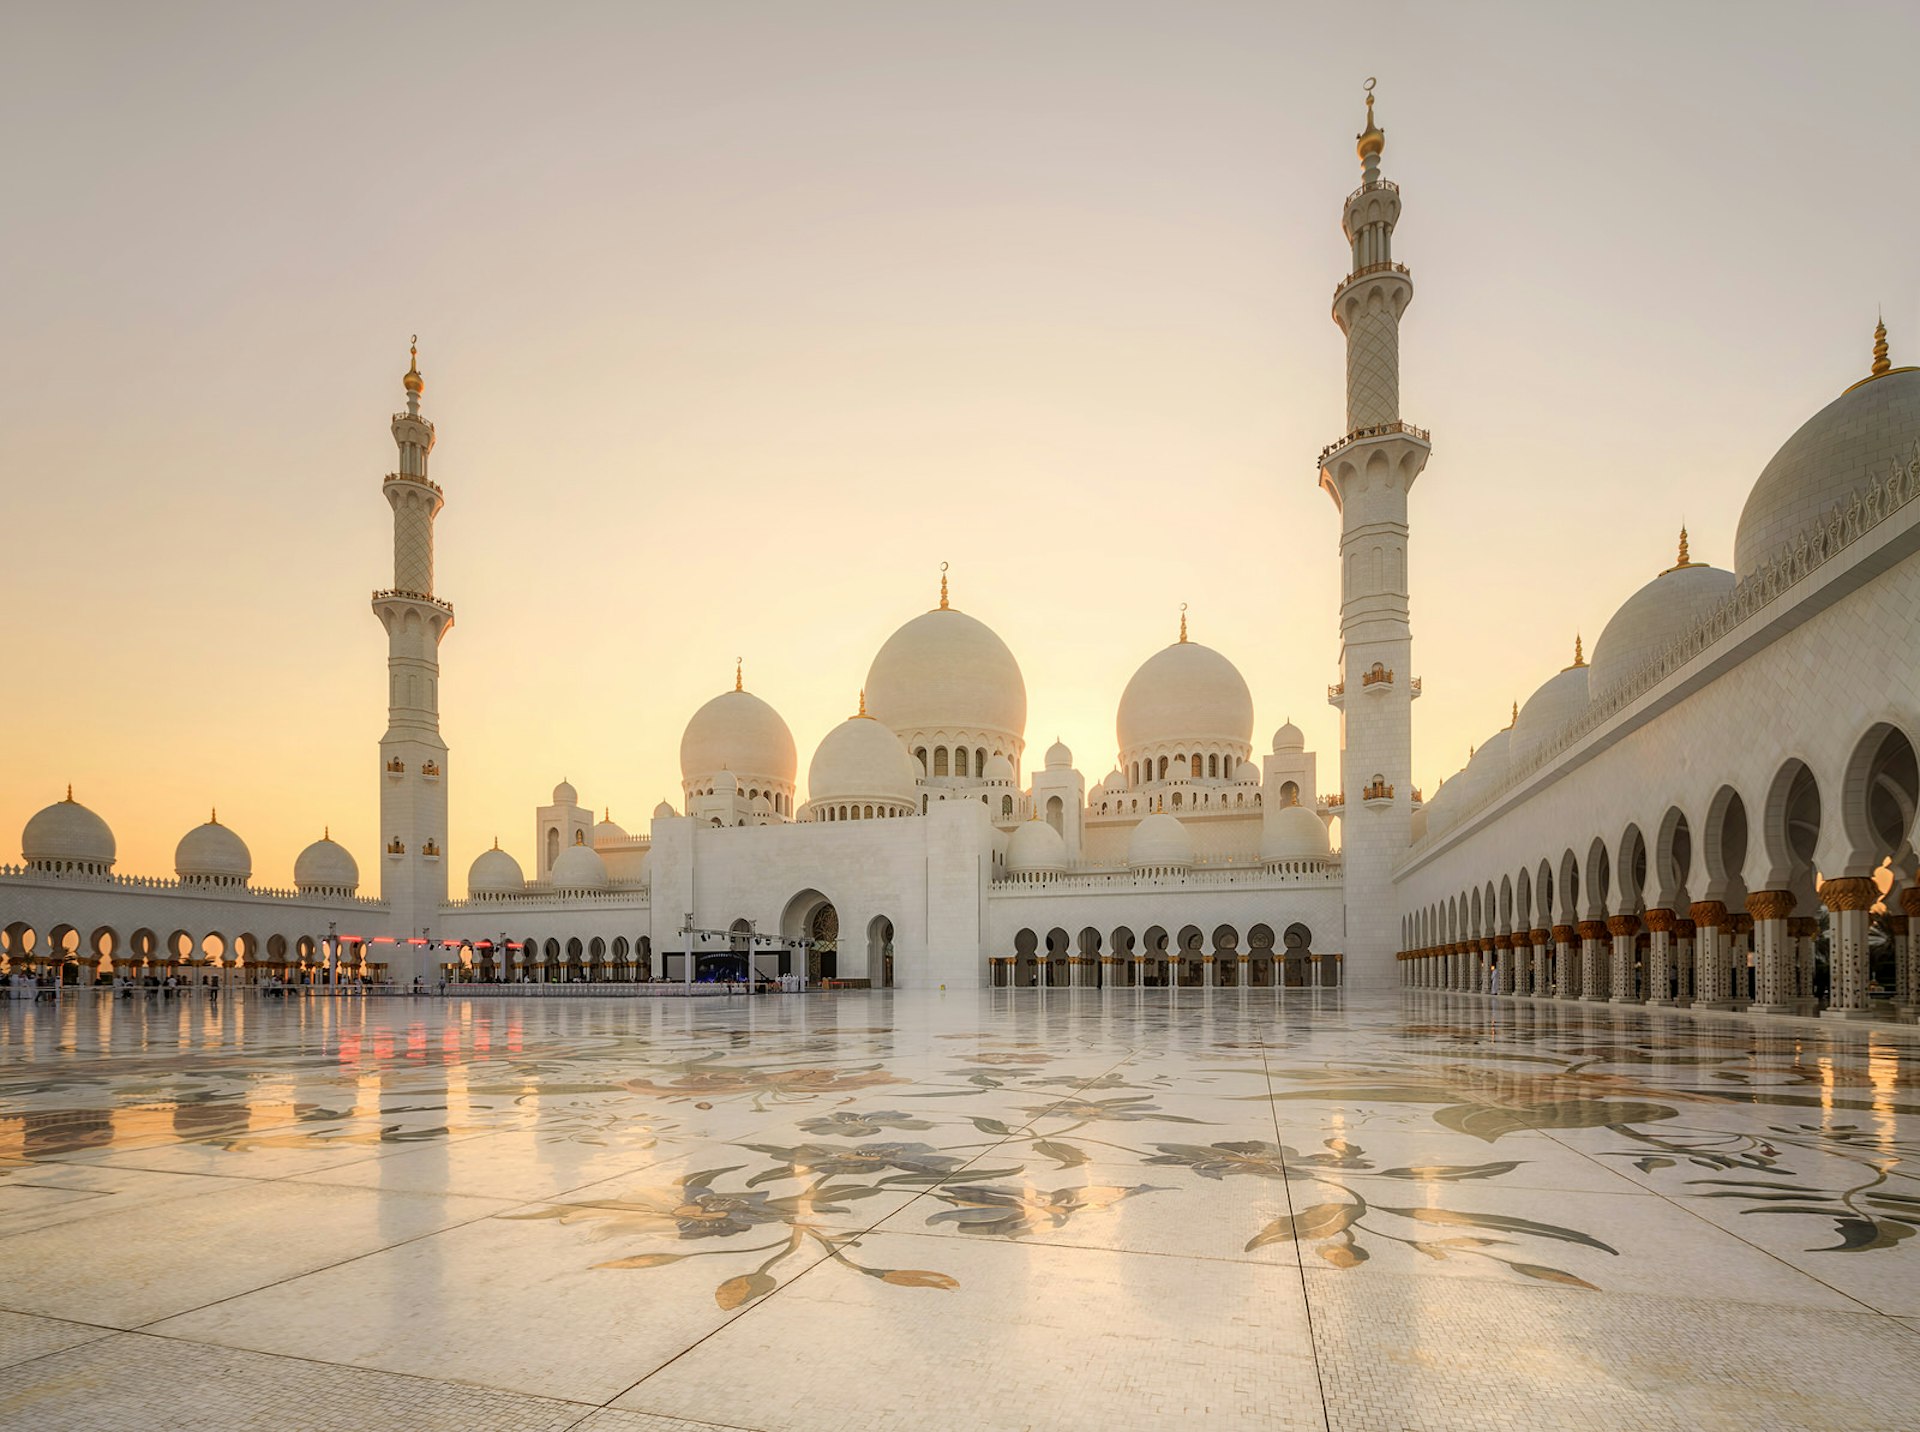 Sheikh Zayed Grand Mosque at dusk. Image by Boule / Shutterstock